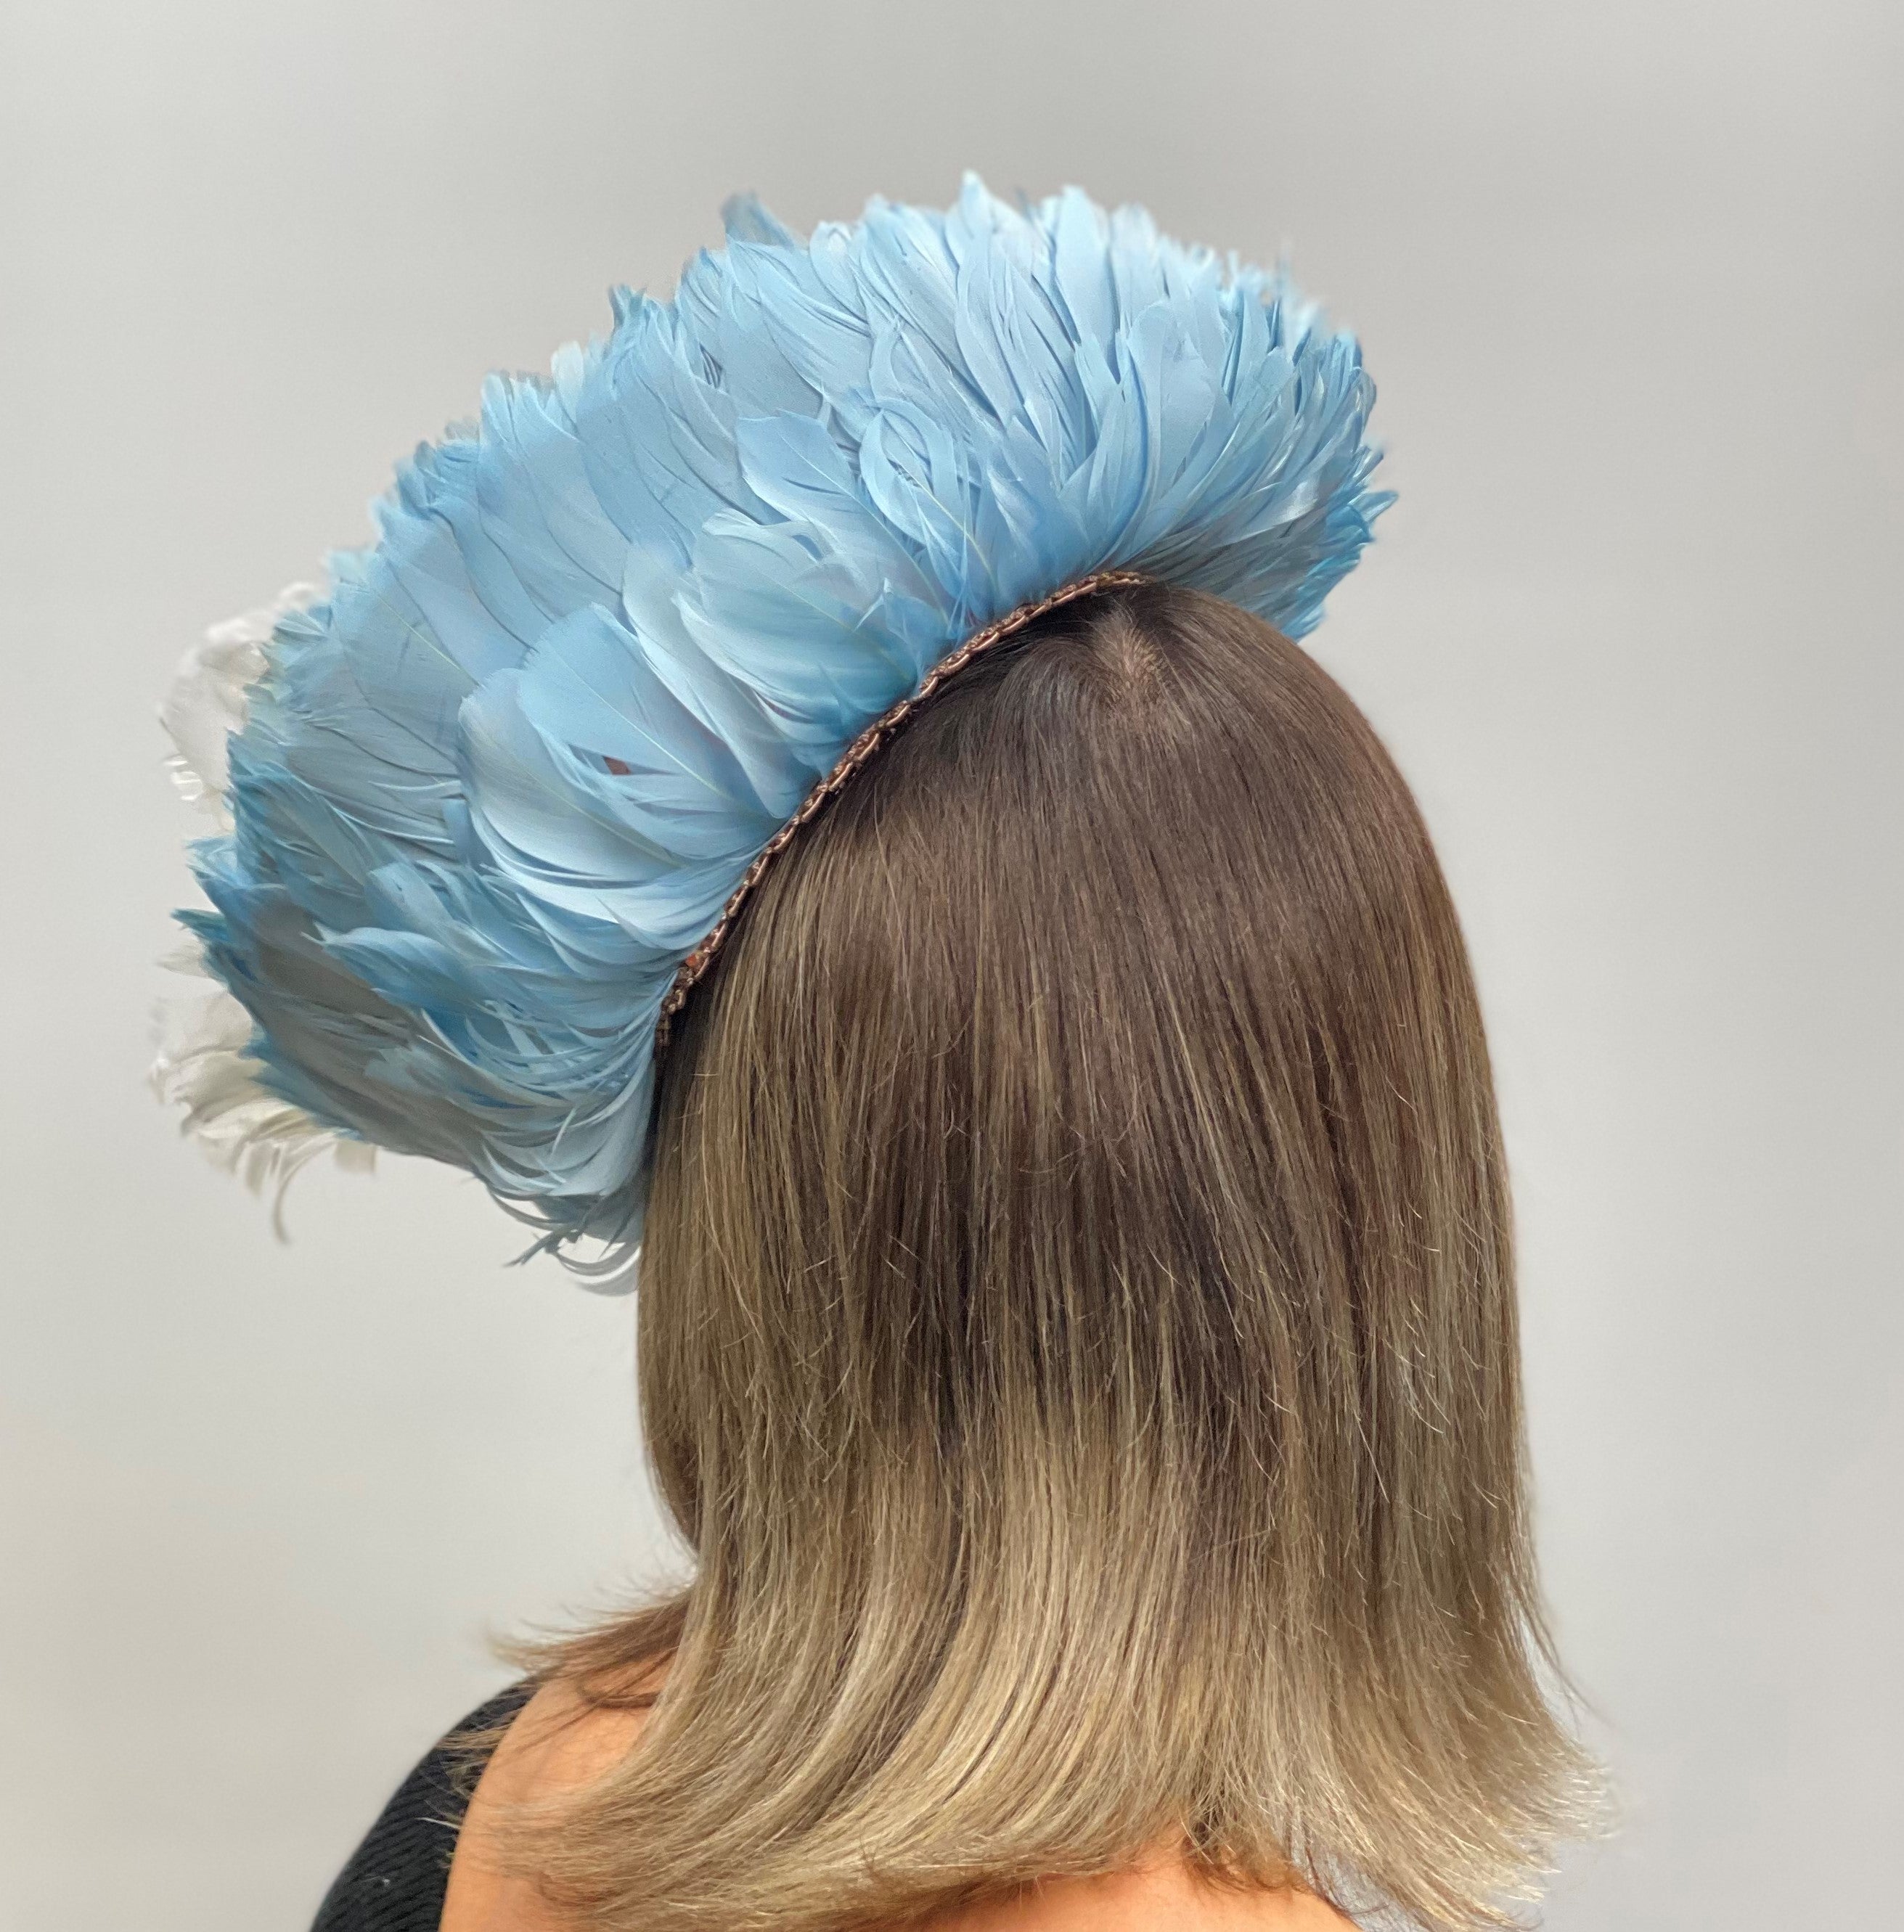 SHANNON Feather Hat Race Day Hat Fascinator